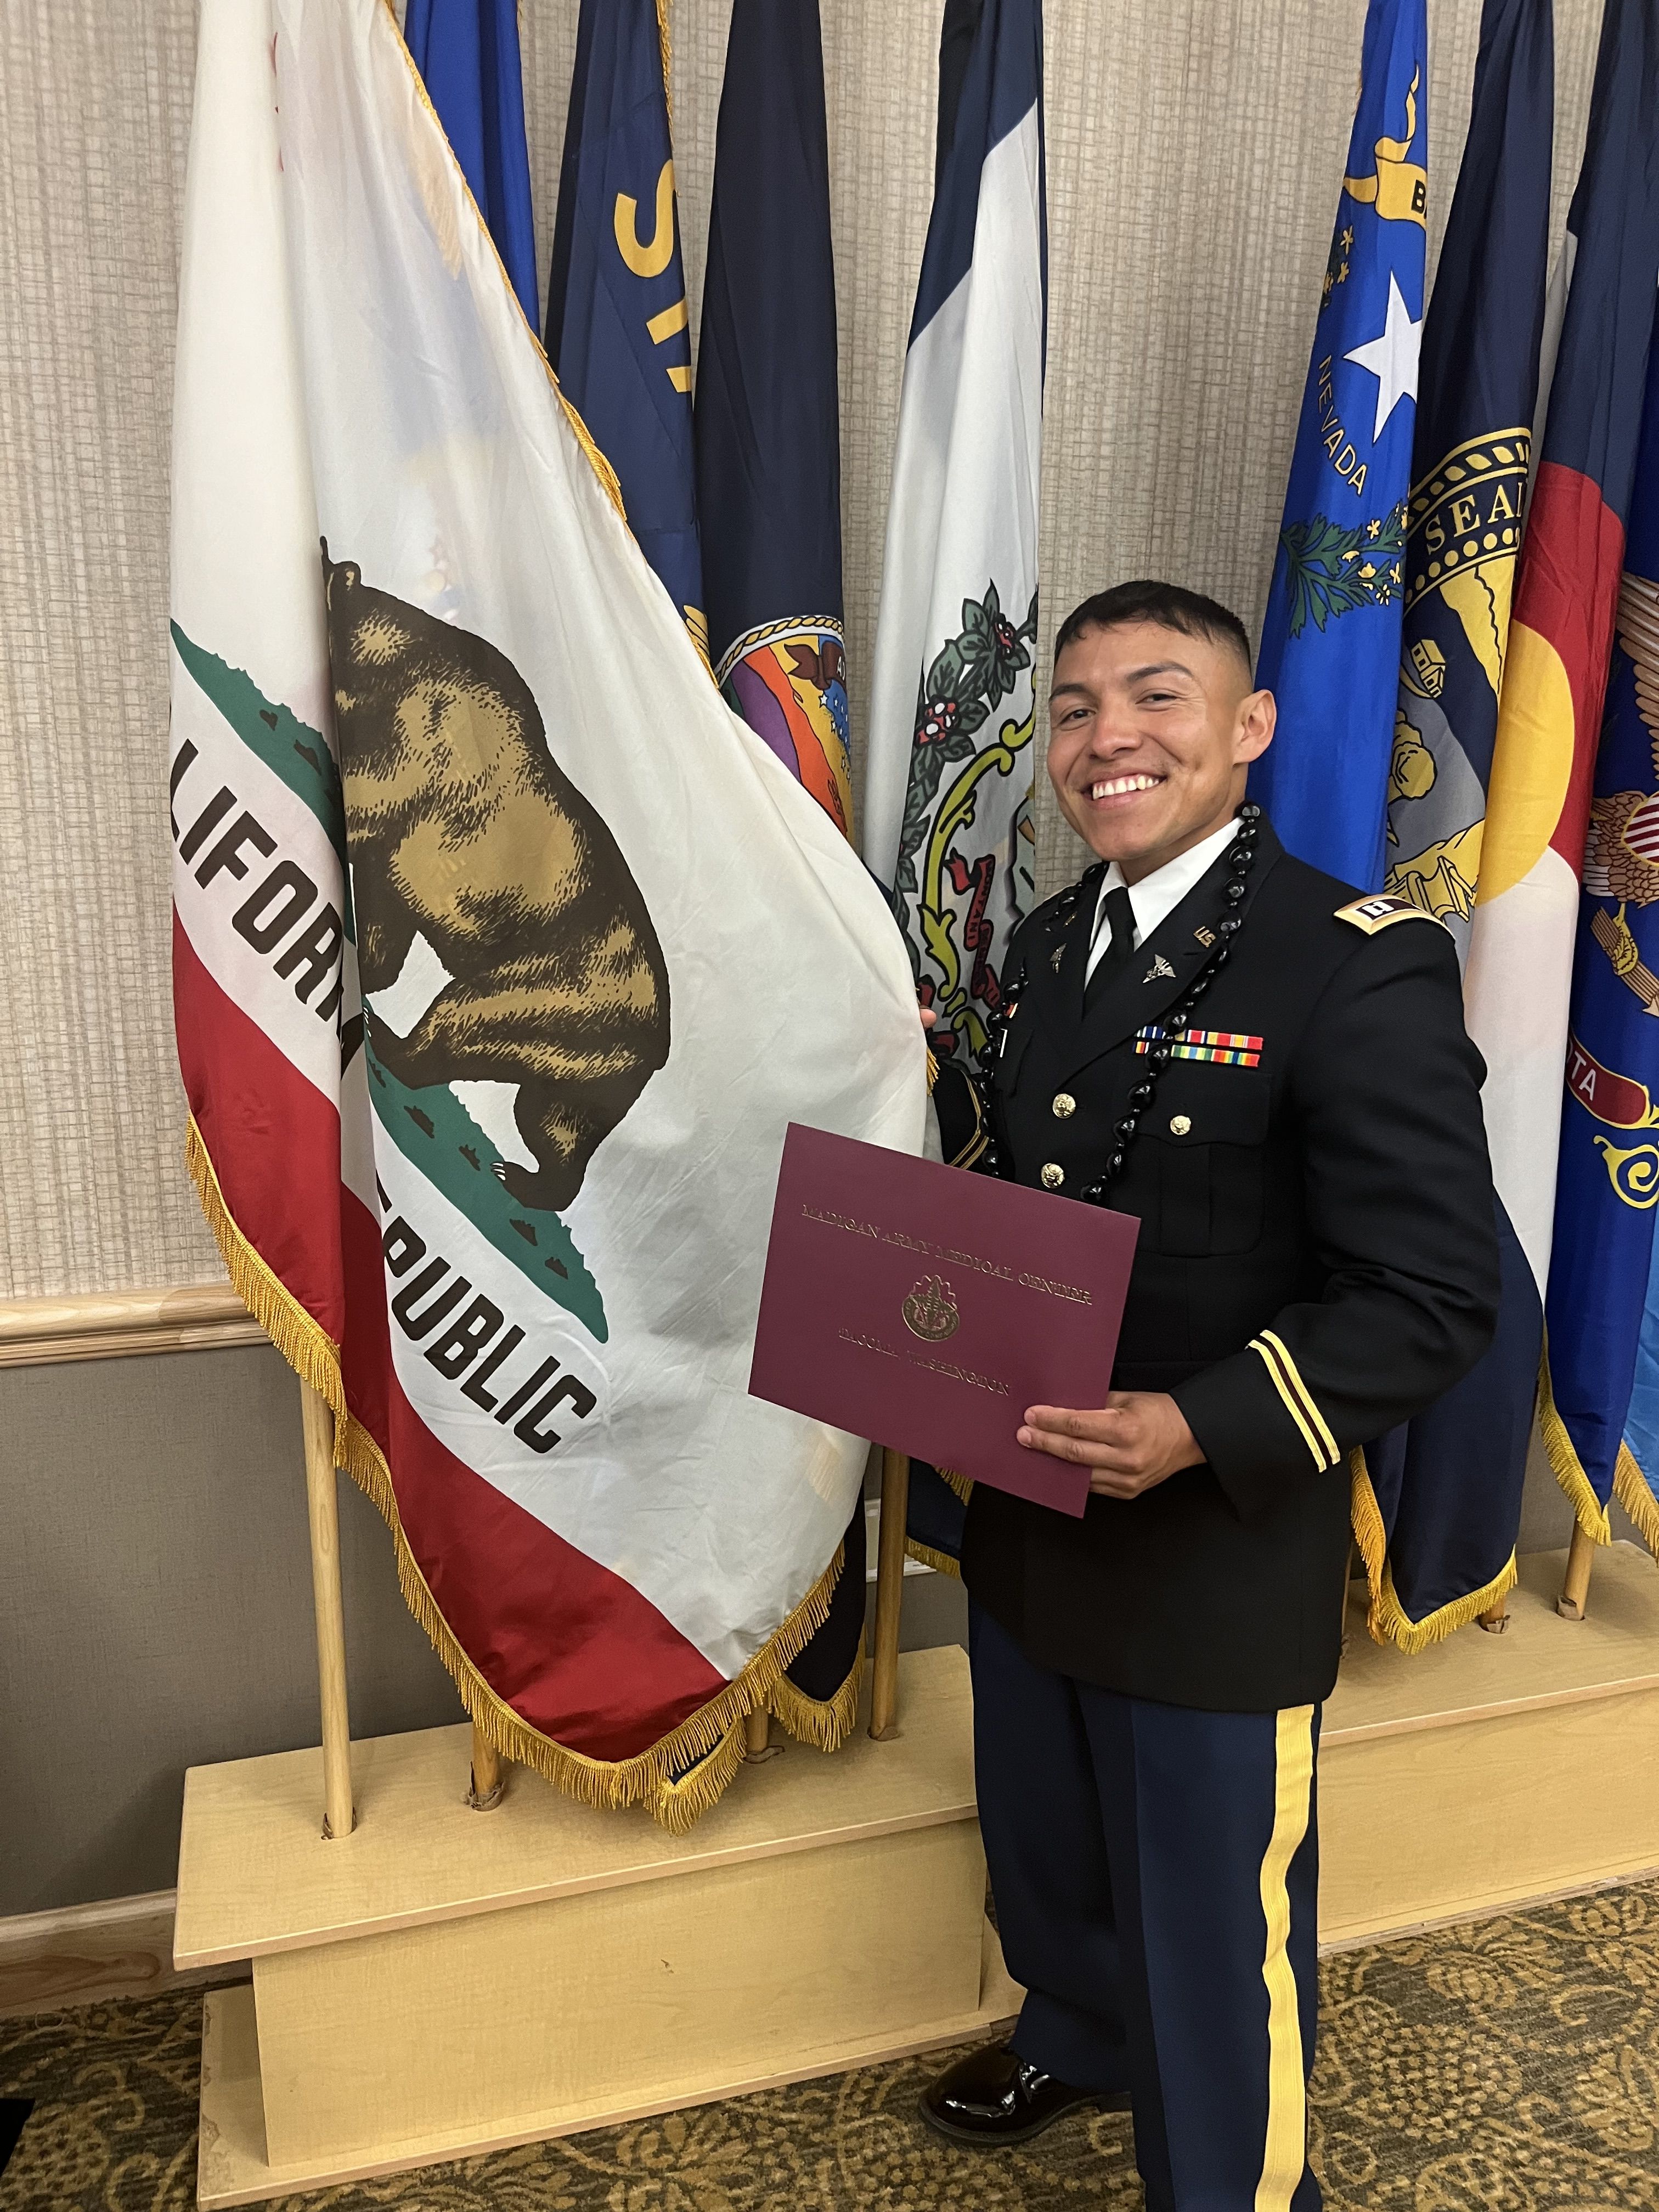 Soldier stands next to California state flag